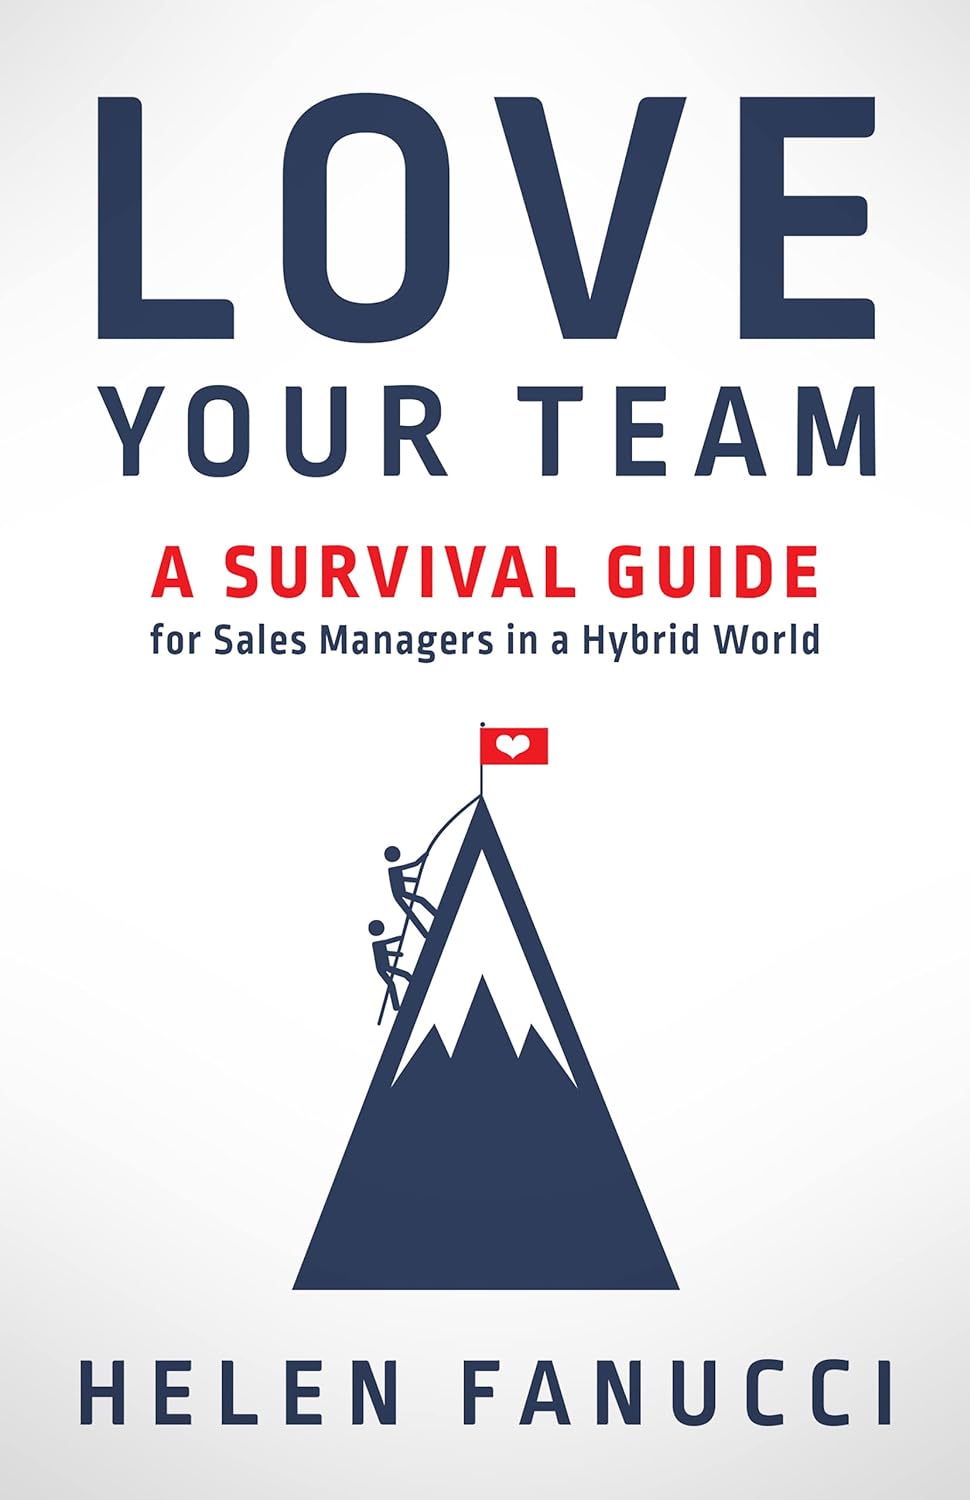 Love Your Team: A Survival Guide for Sales Managers in a Hybrid World, by Helen Fanucci